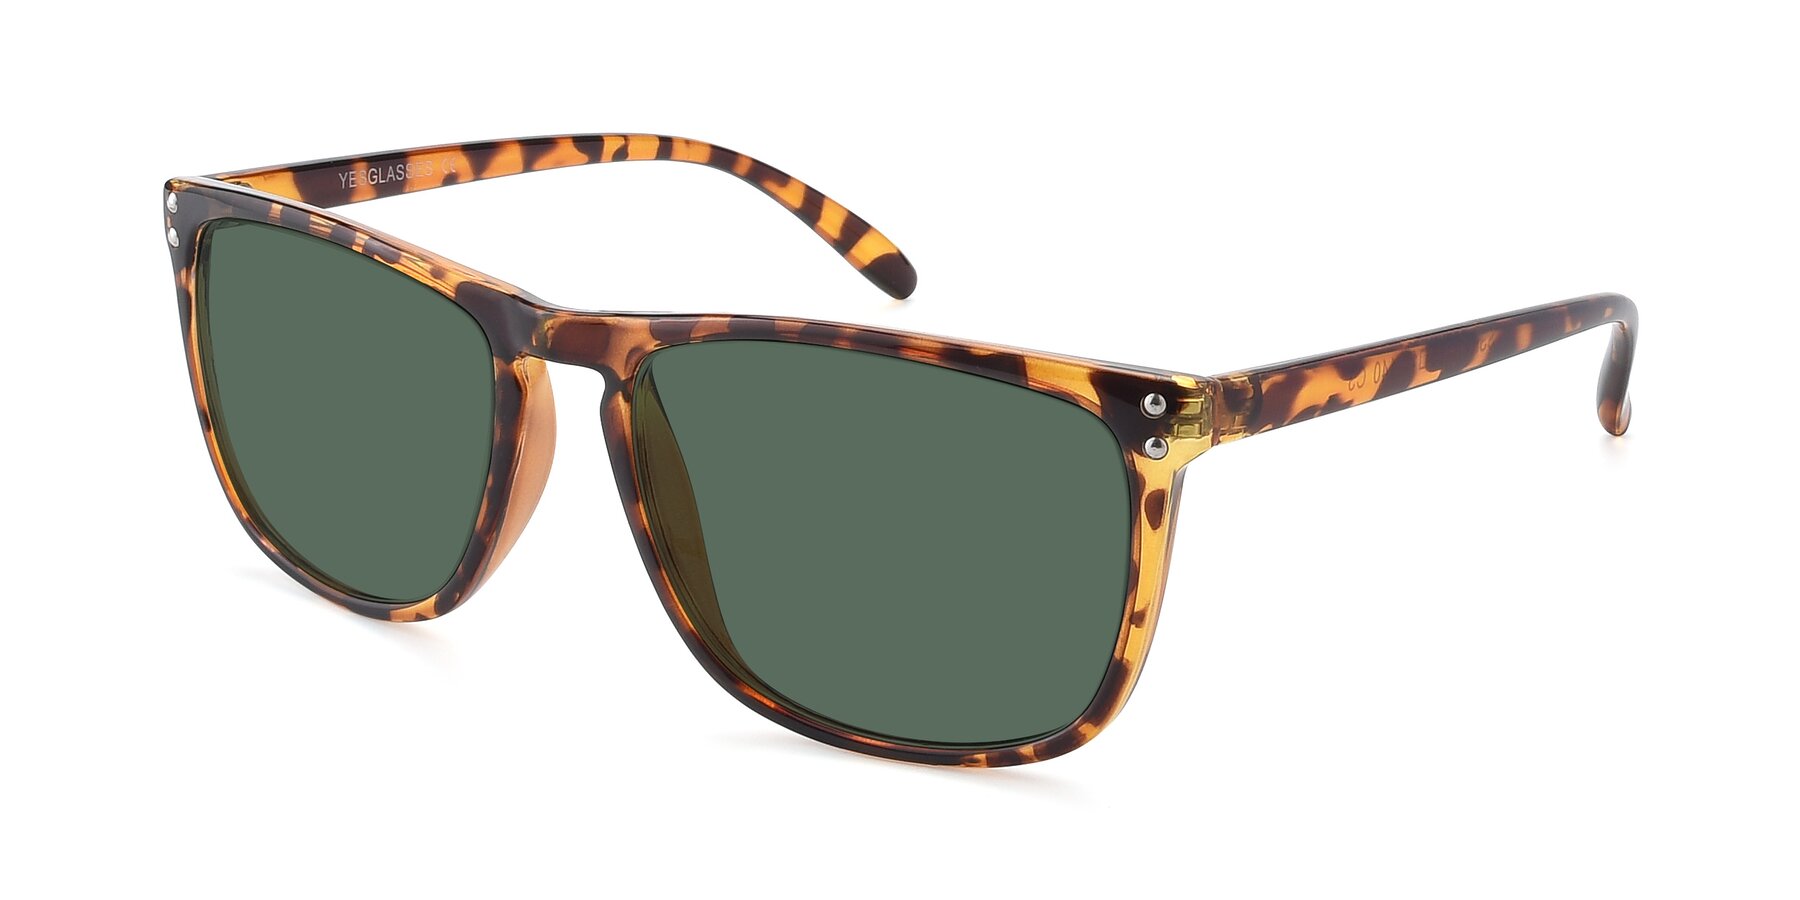 Angle of SSR411 in Translucent Orange Tortoise with Green Polarized Lenses